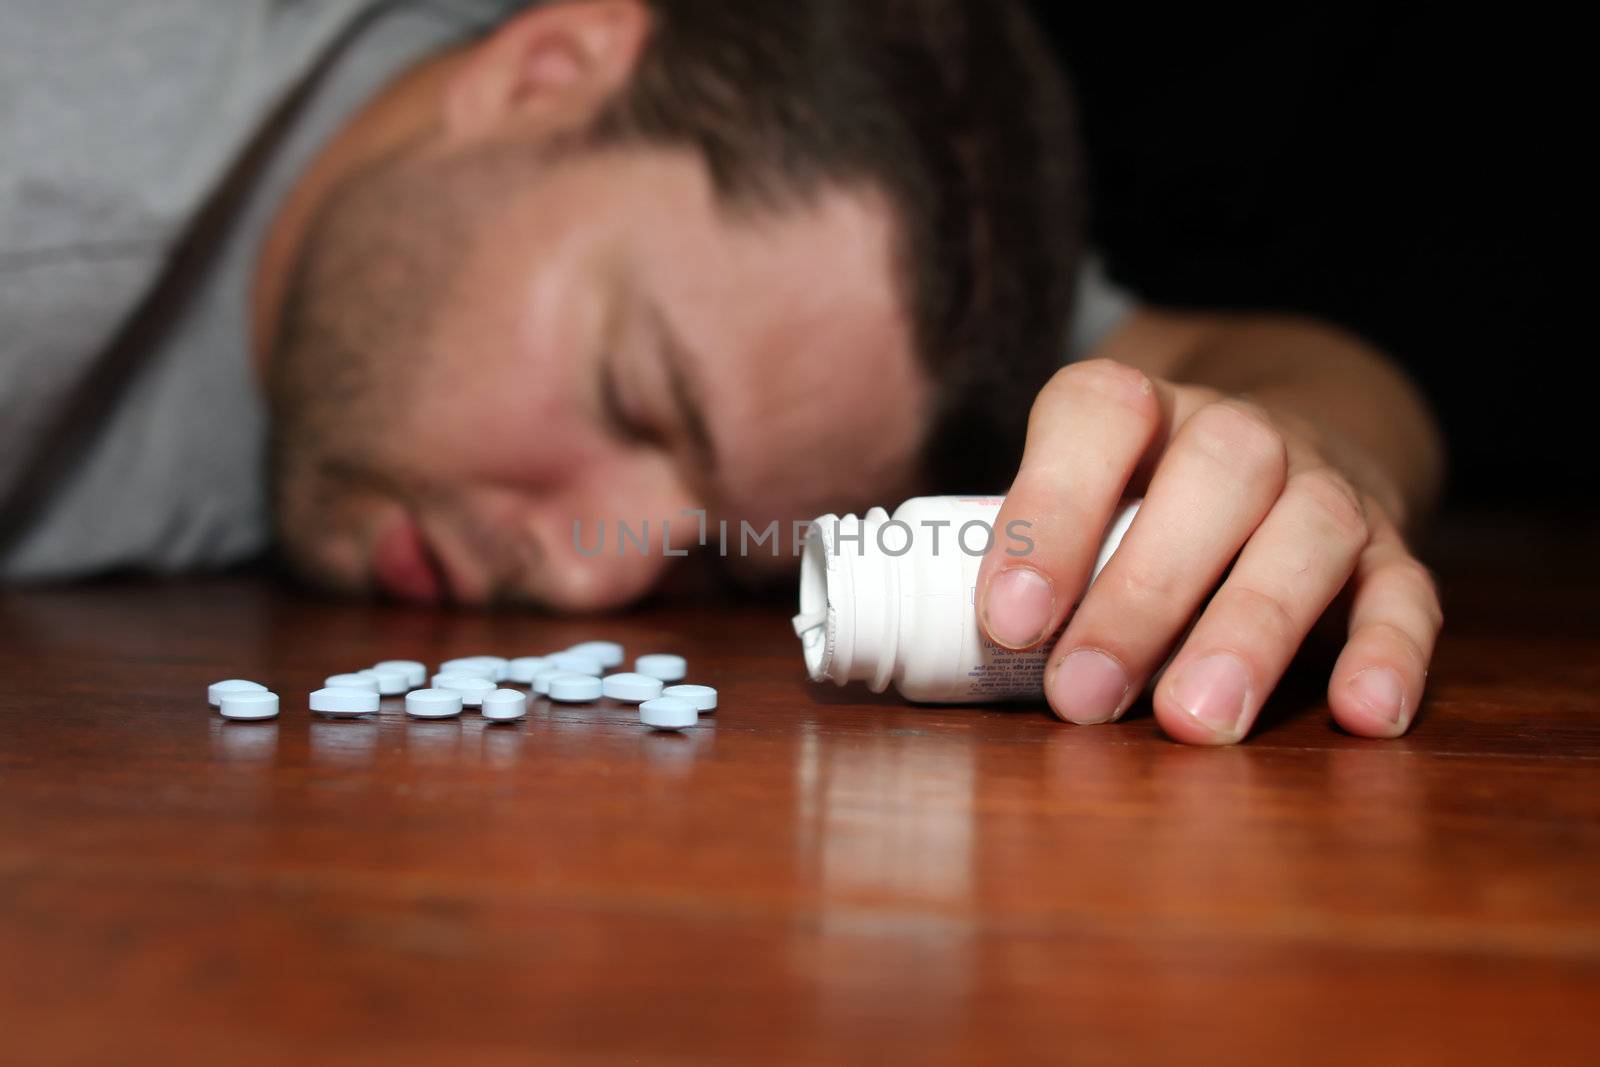 Man appearing to have overdosed on pills